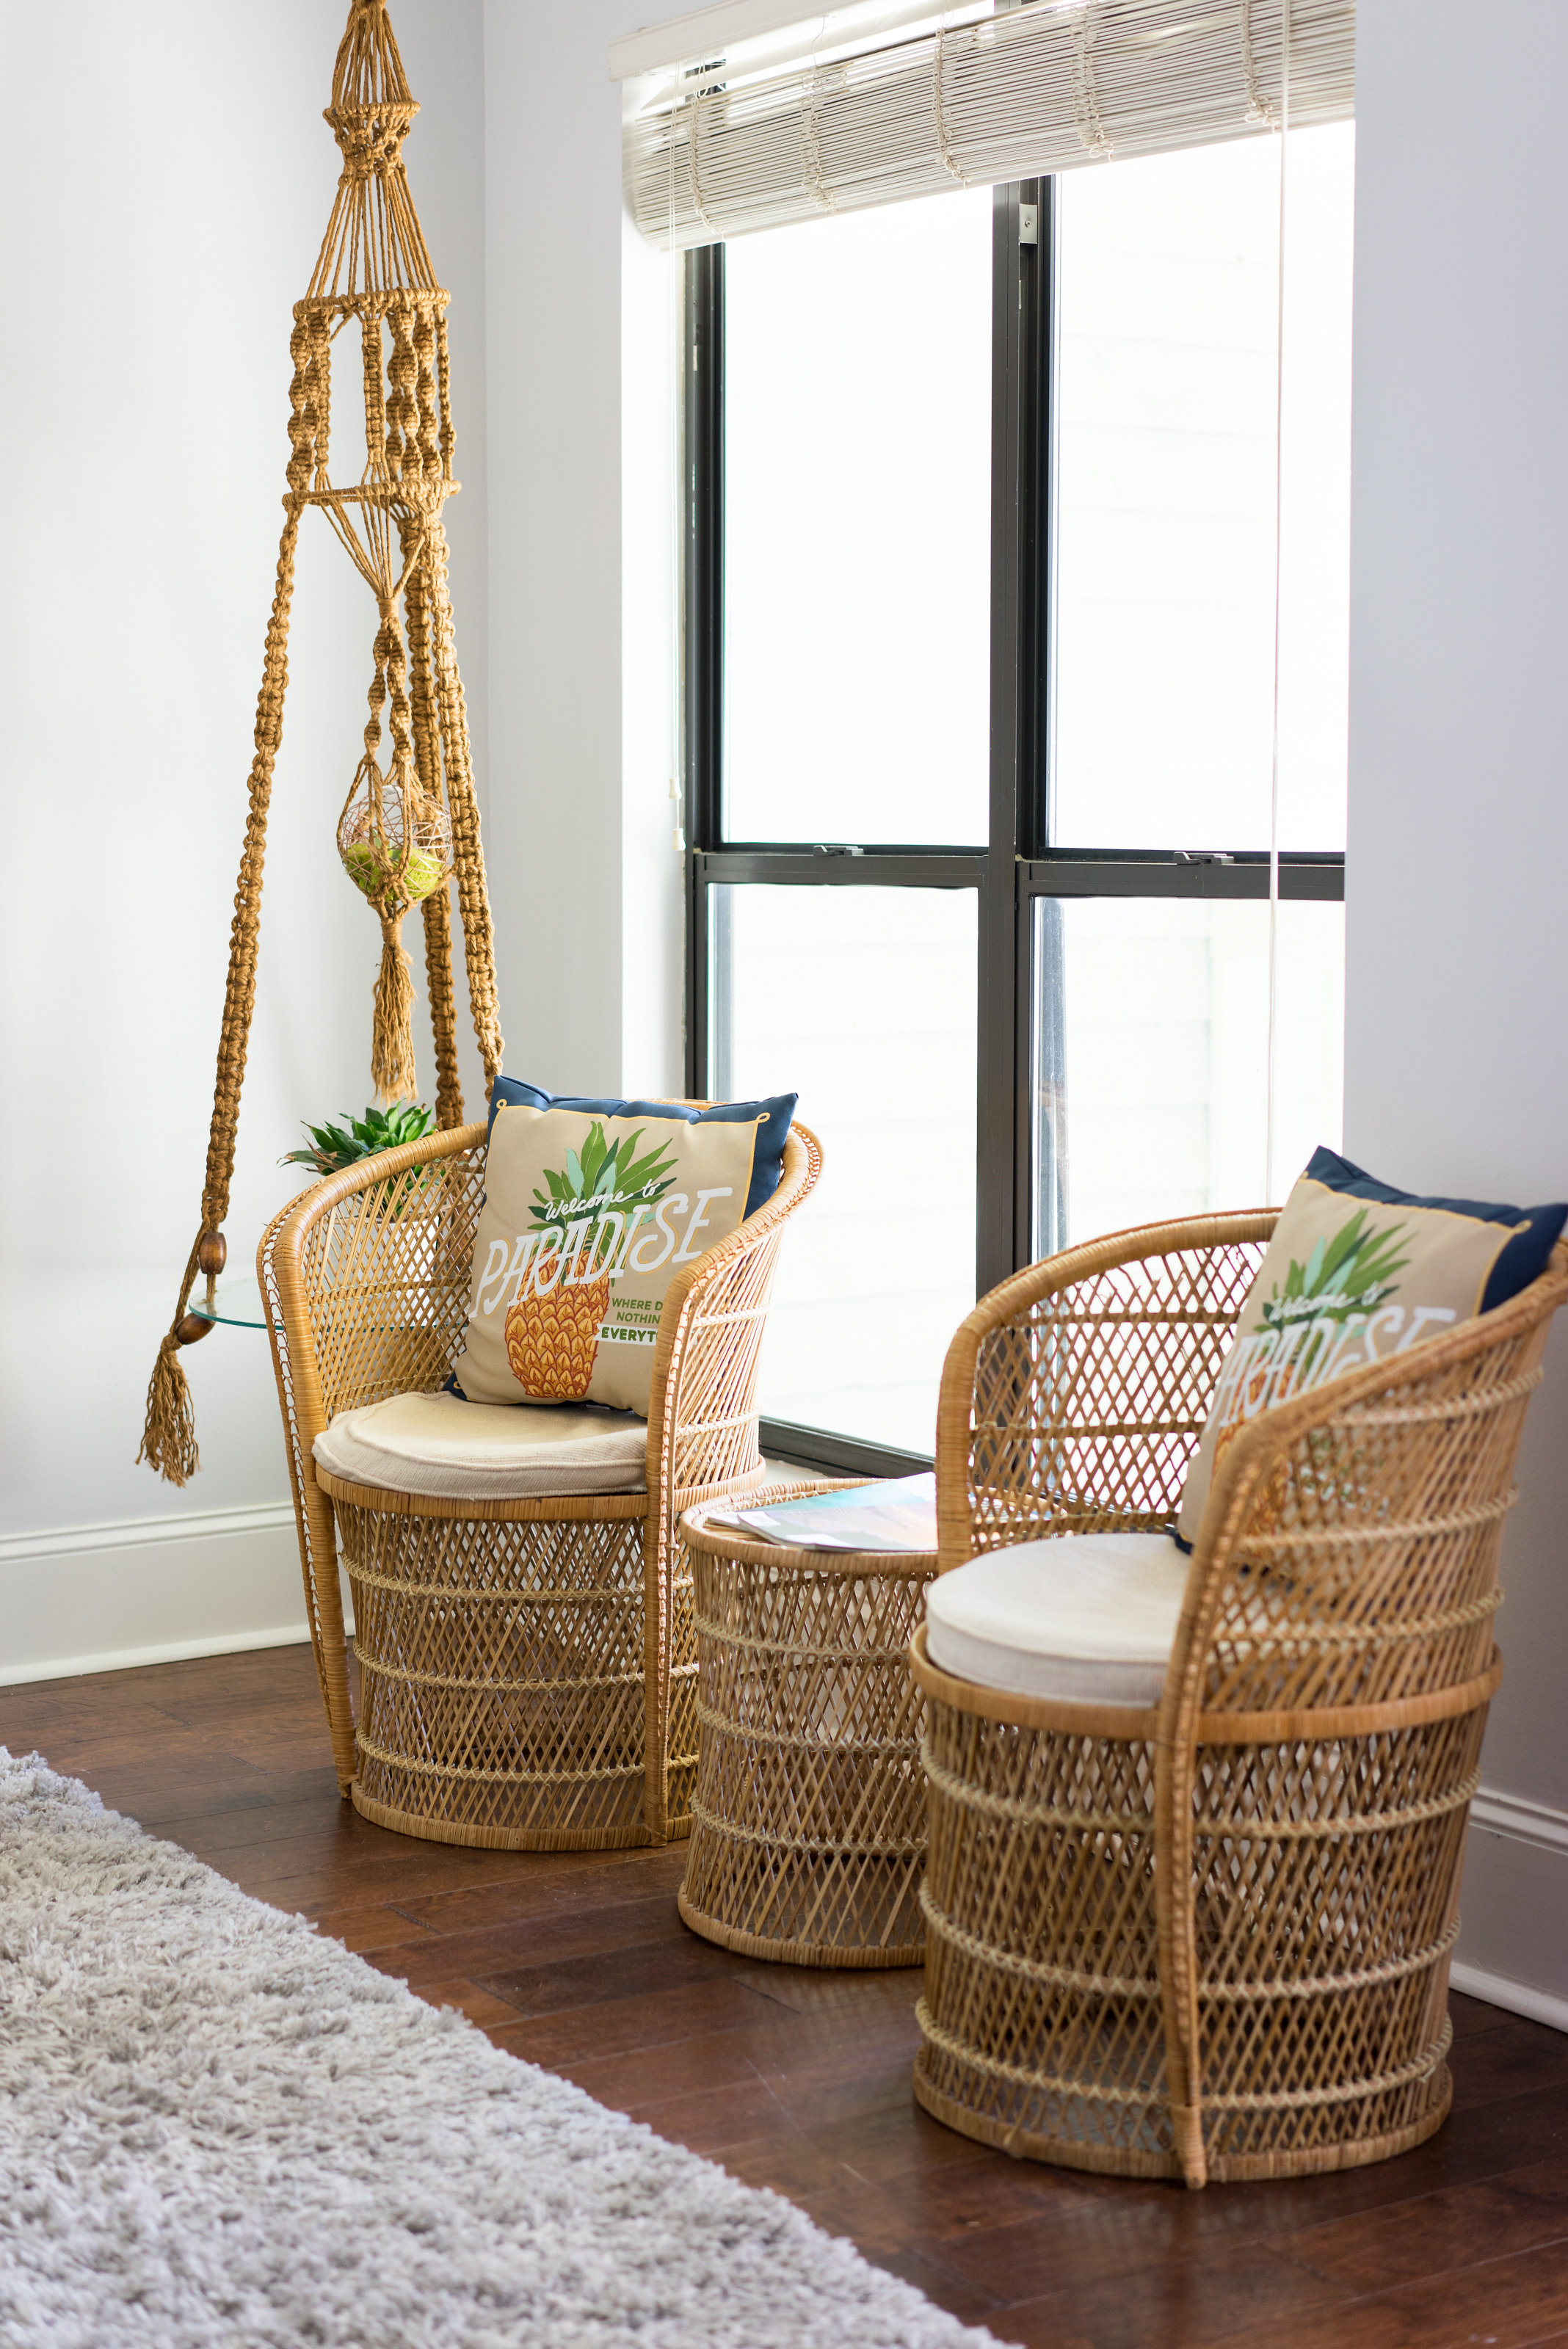 House Tour: Two rattan chairs with decorative pillows that say Welcome to Paradise